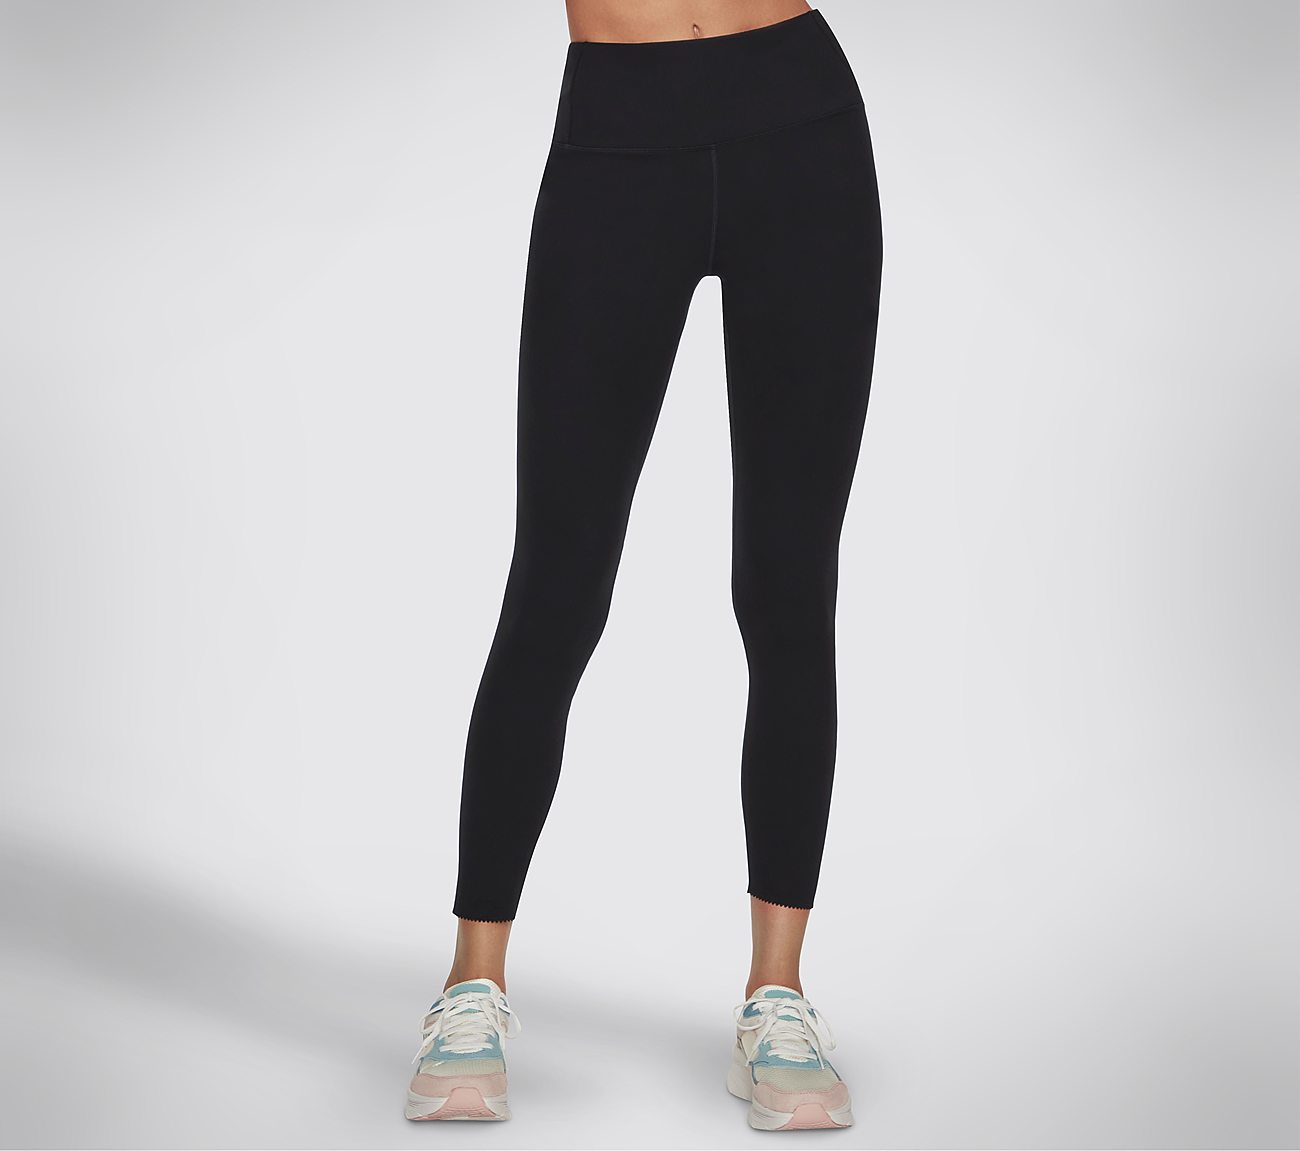 GOSCULPT SCALLOPED HW LEGGING, BBBBLACK Apparels Lateral View